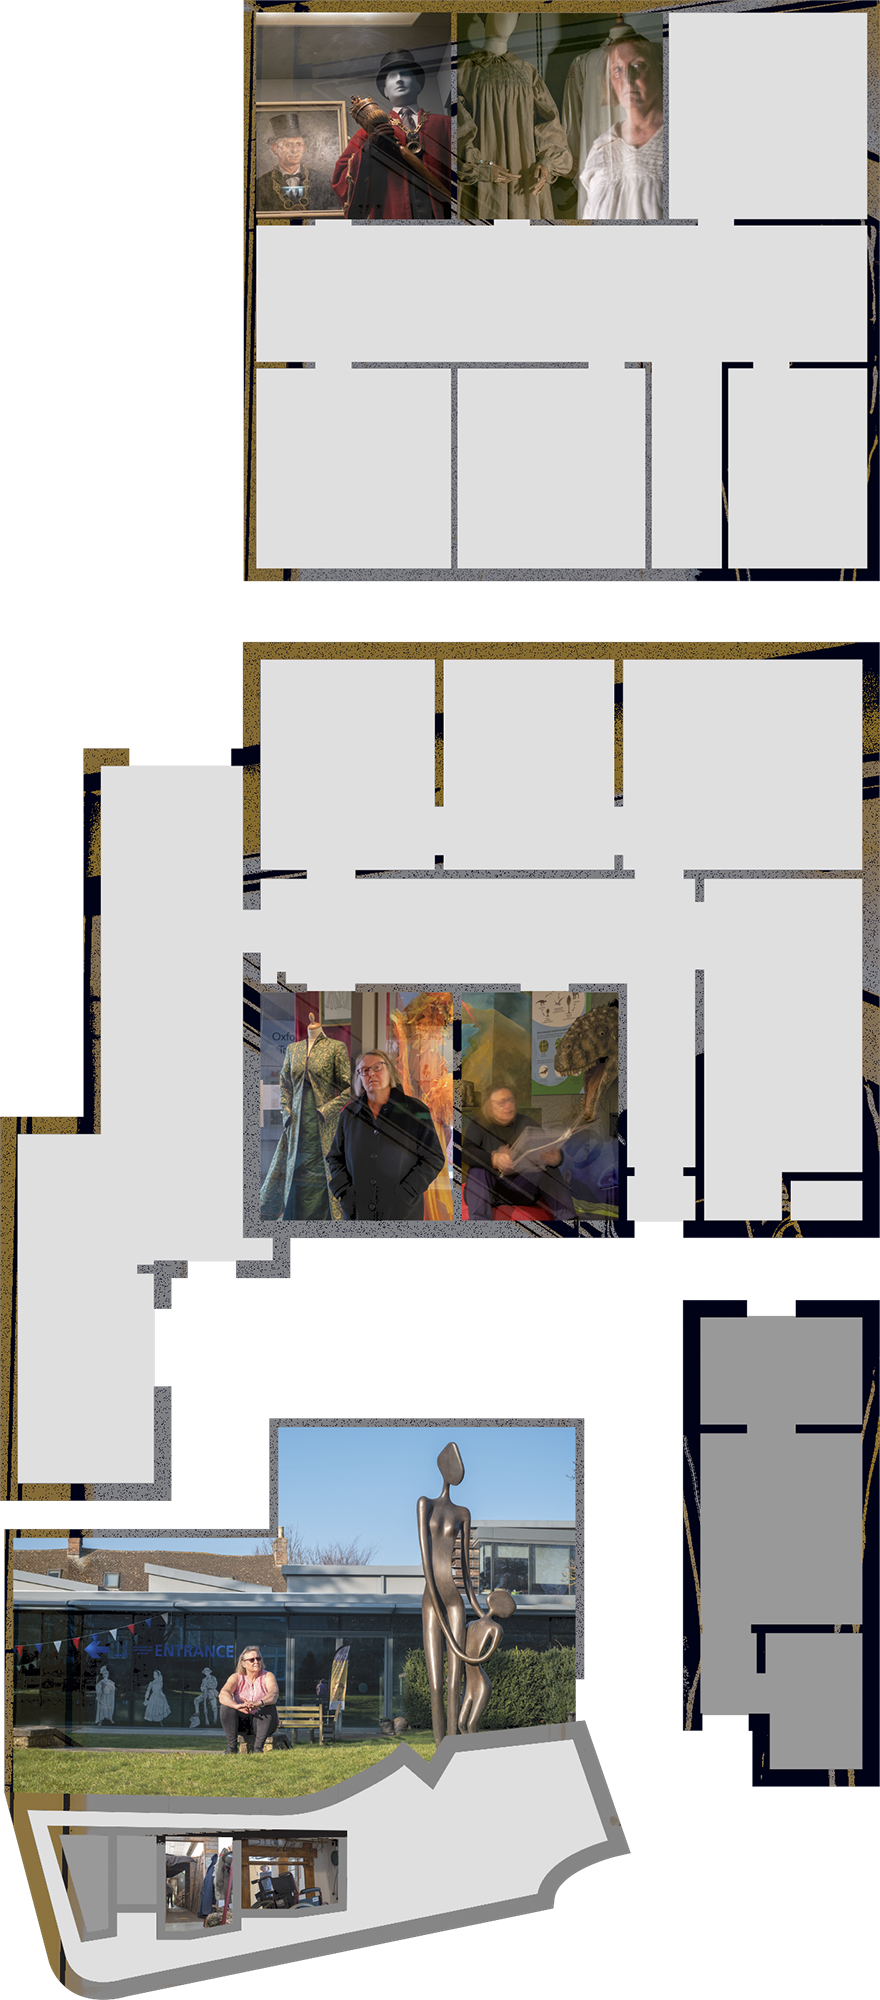 Floor plan of Oxfordshire Museum with superimposed images on top.